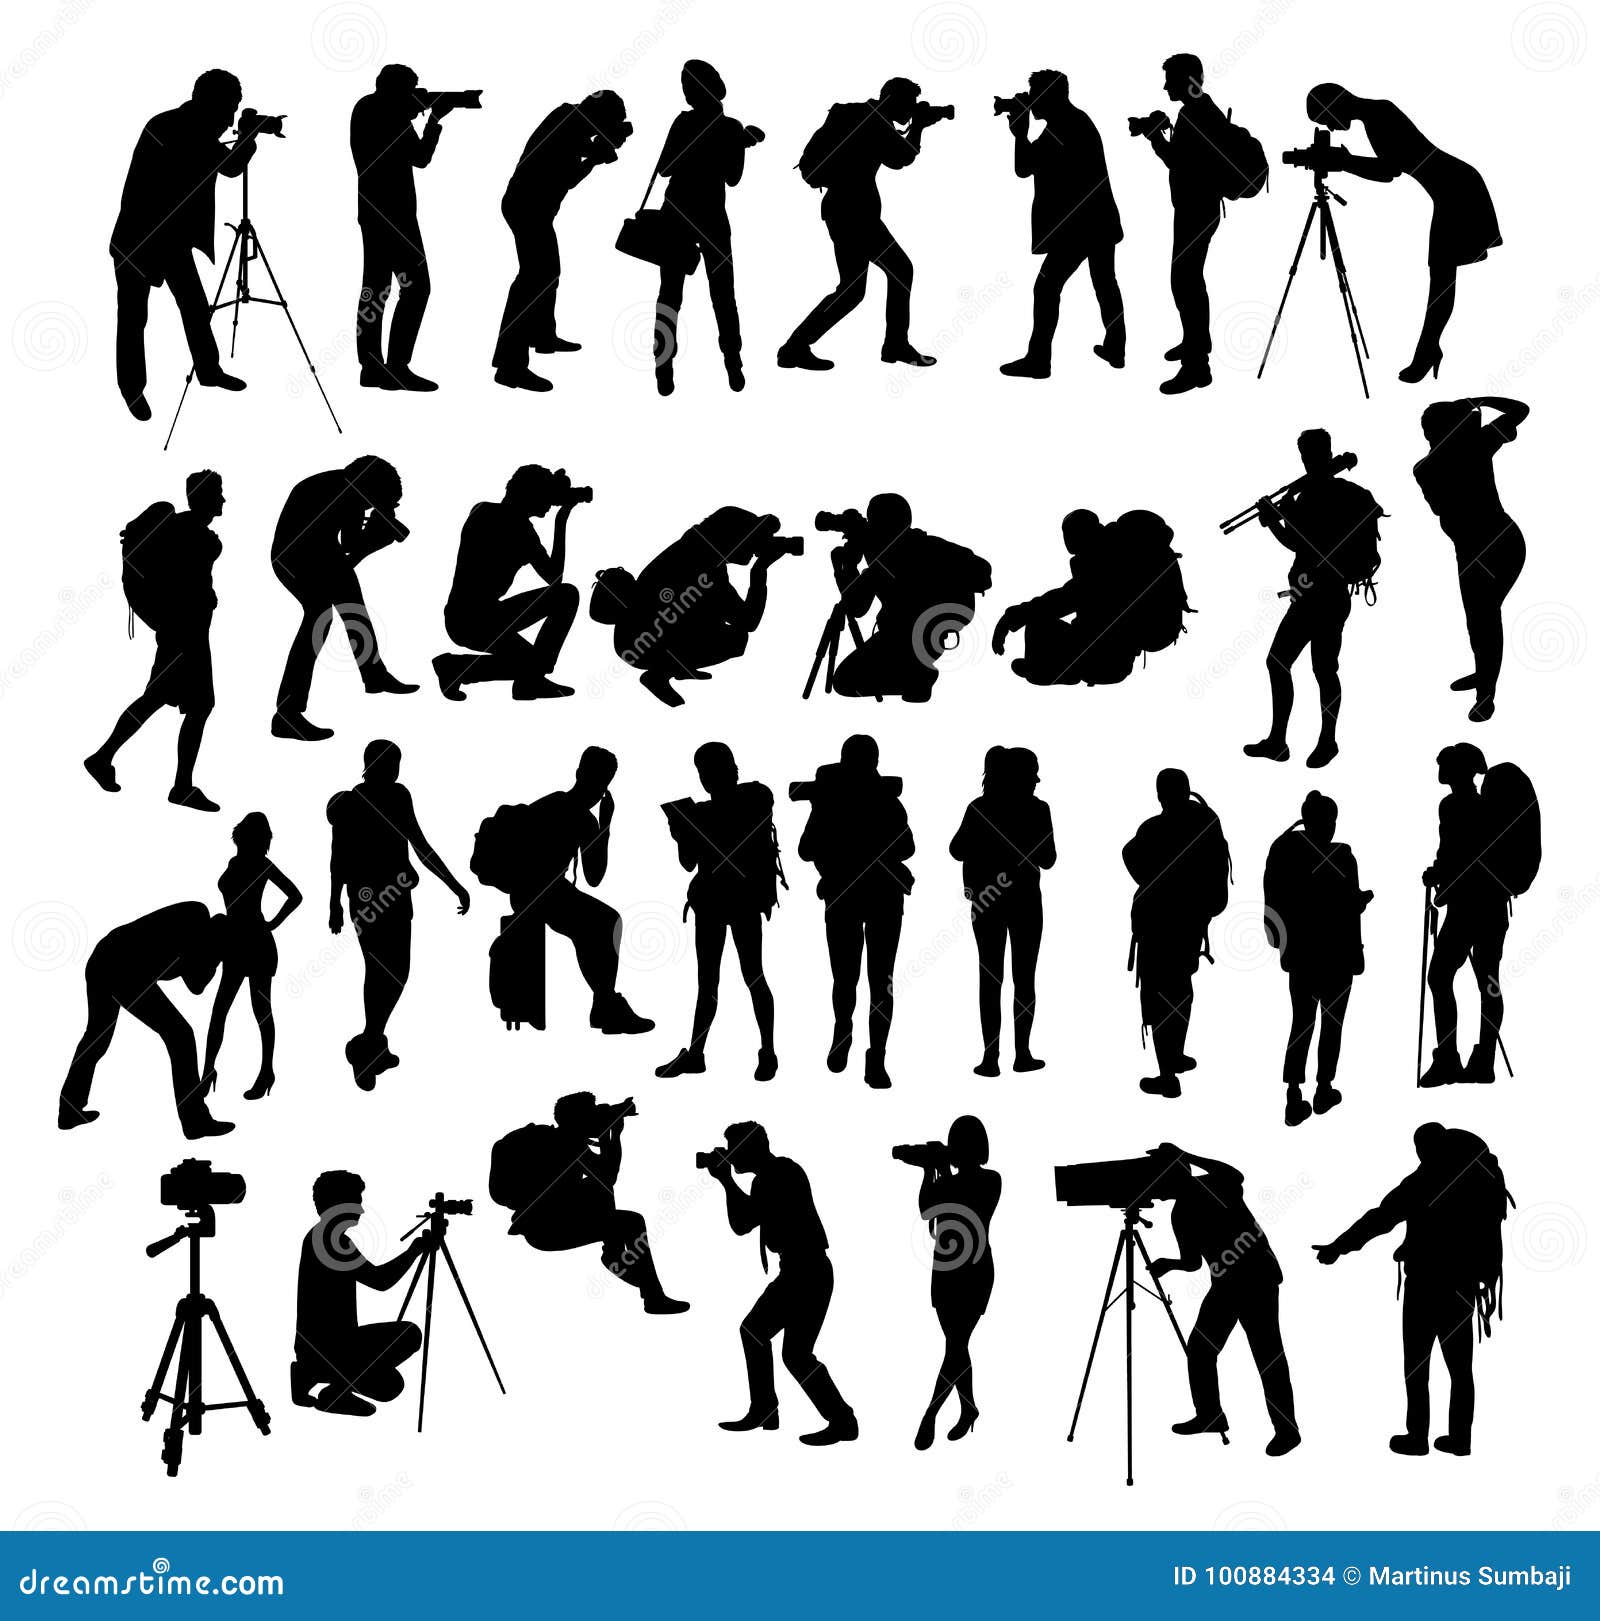 backpacker and photographer silhouettes